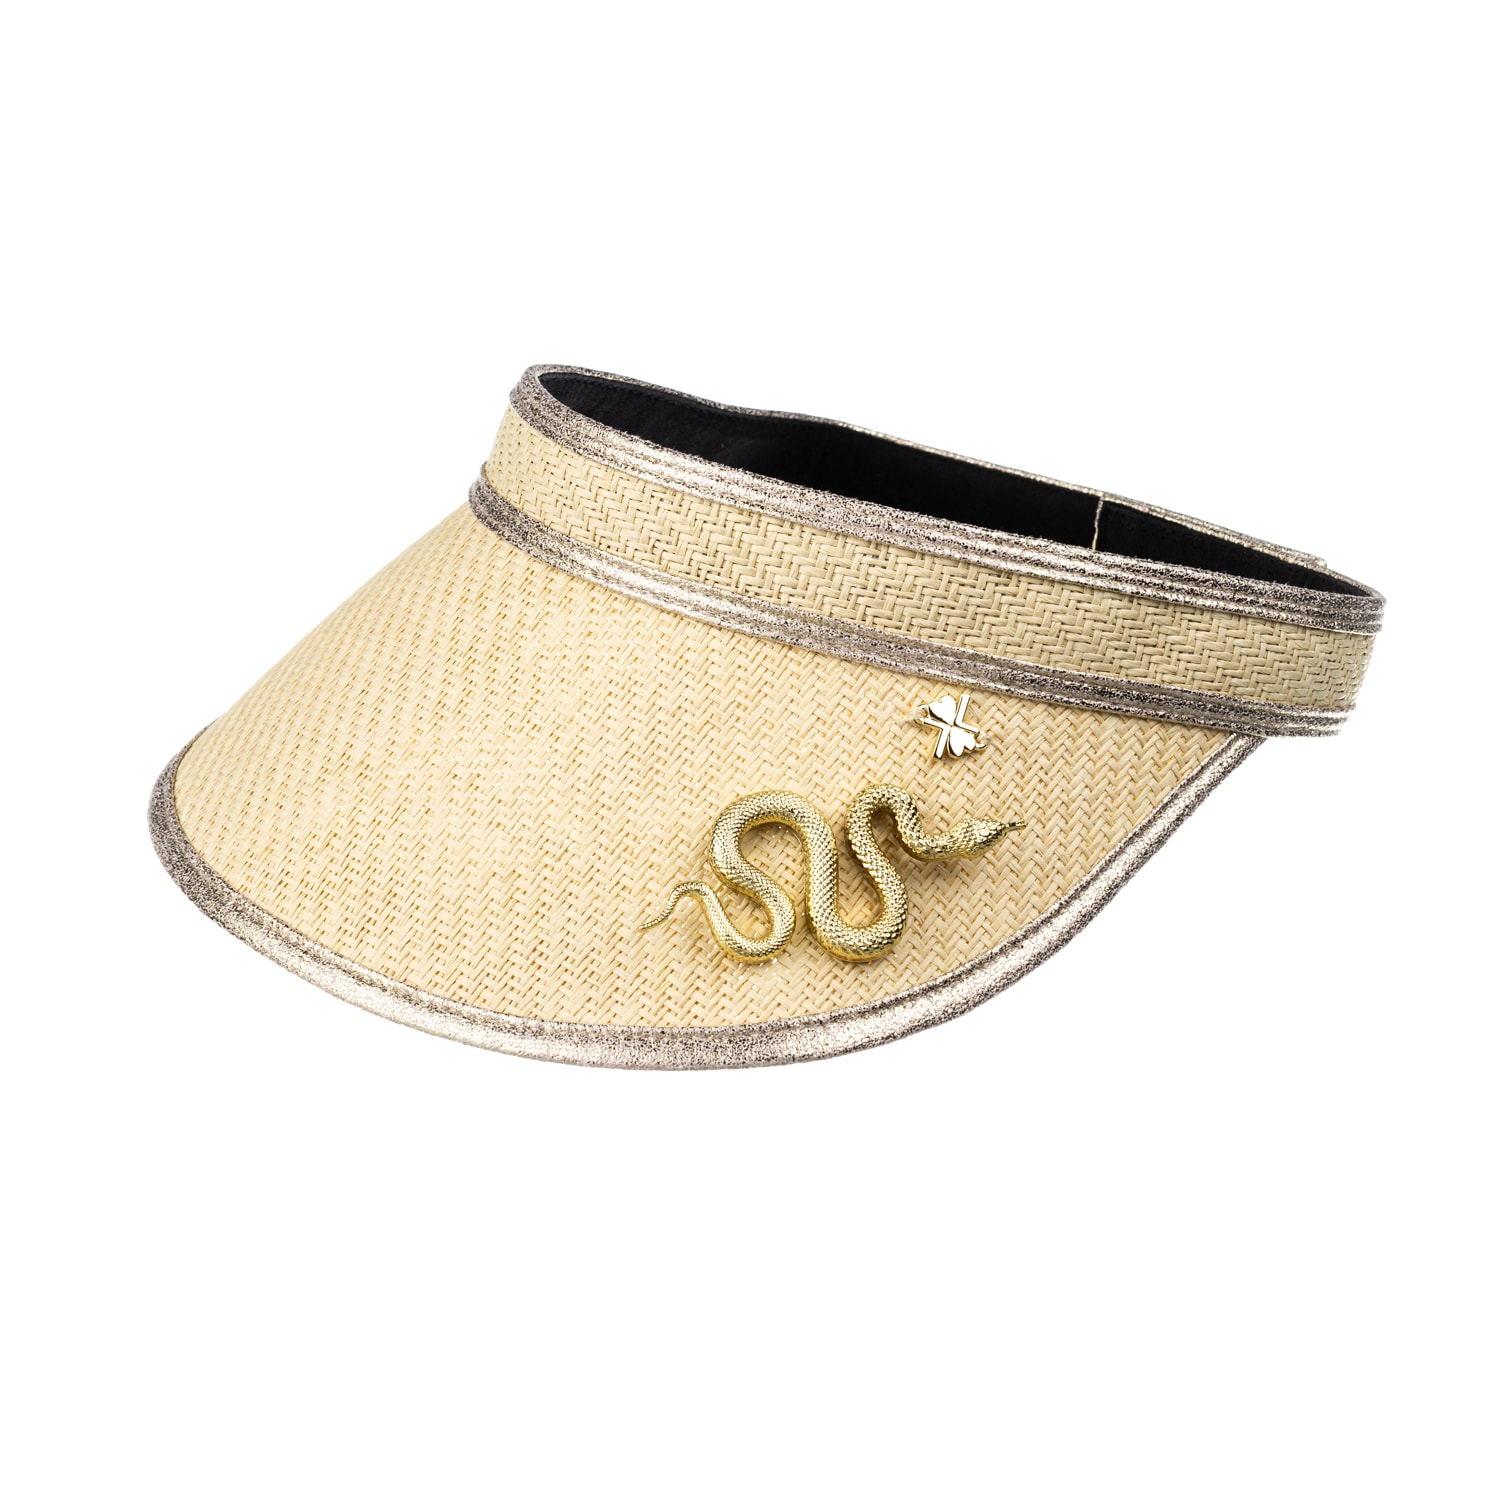 Women’s Neutrals Straw Woven Visor With Gold Metal Snake Brooch - Cream One Size Laines London